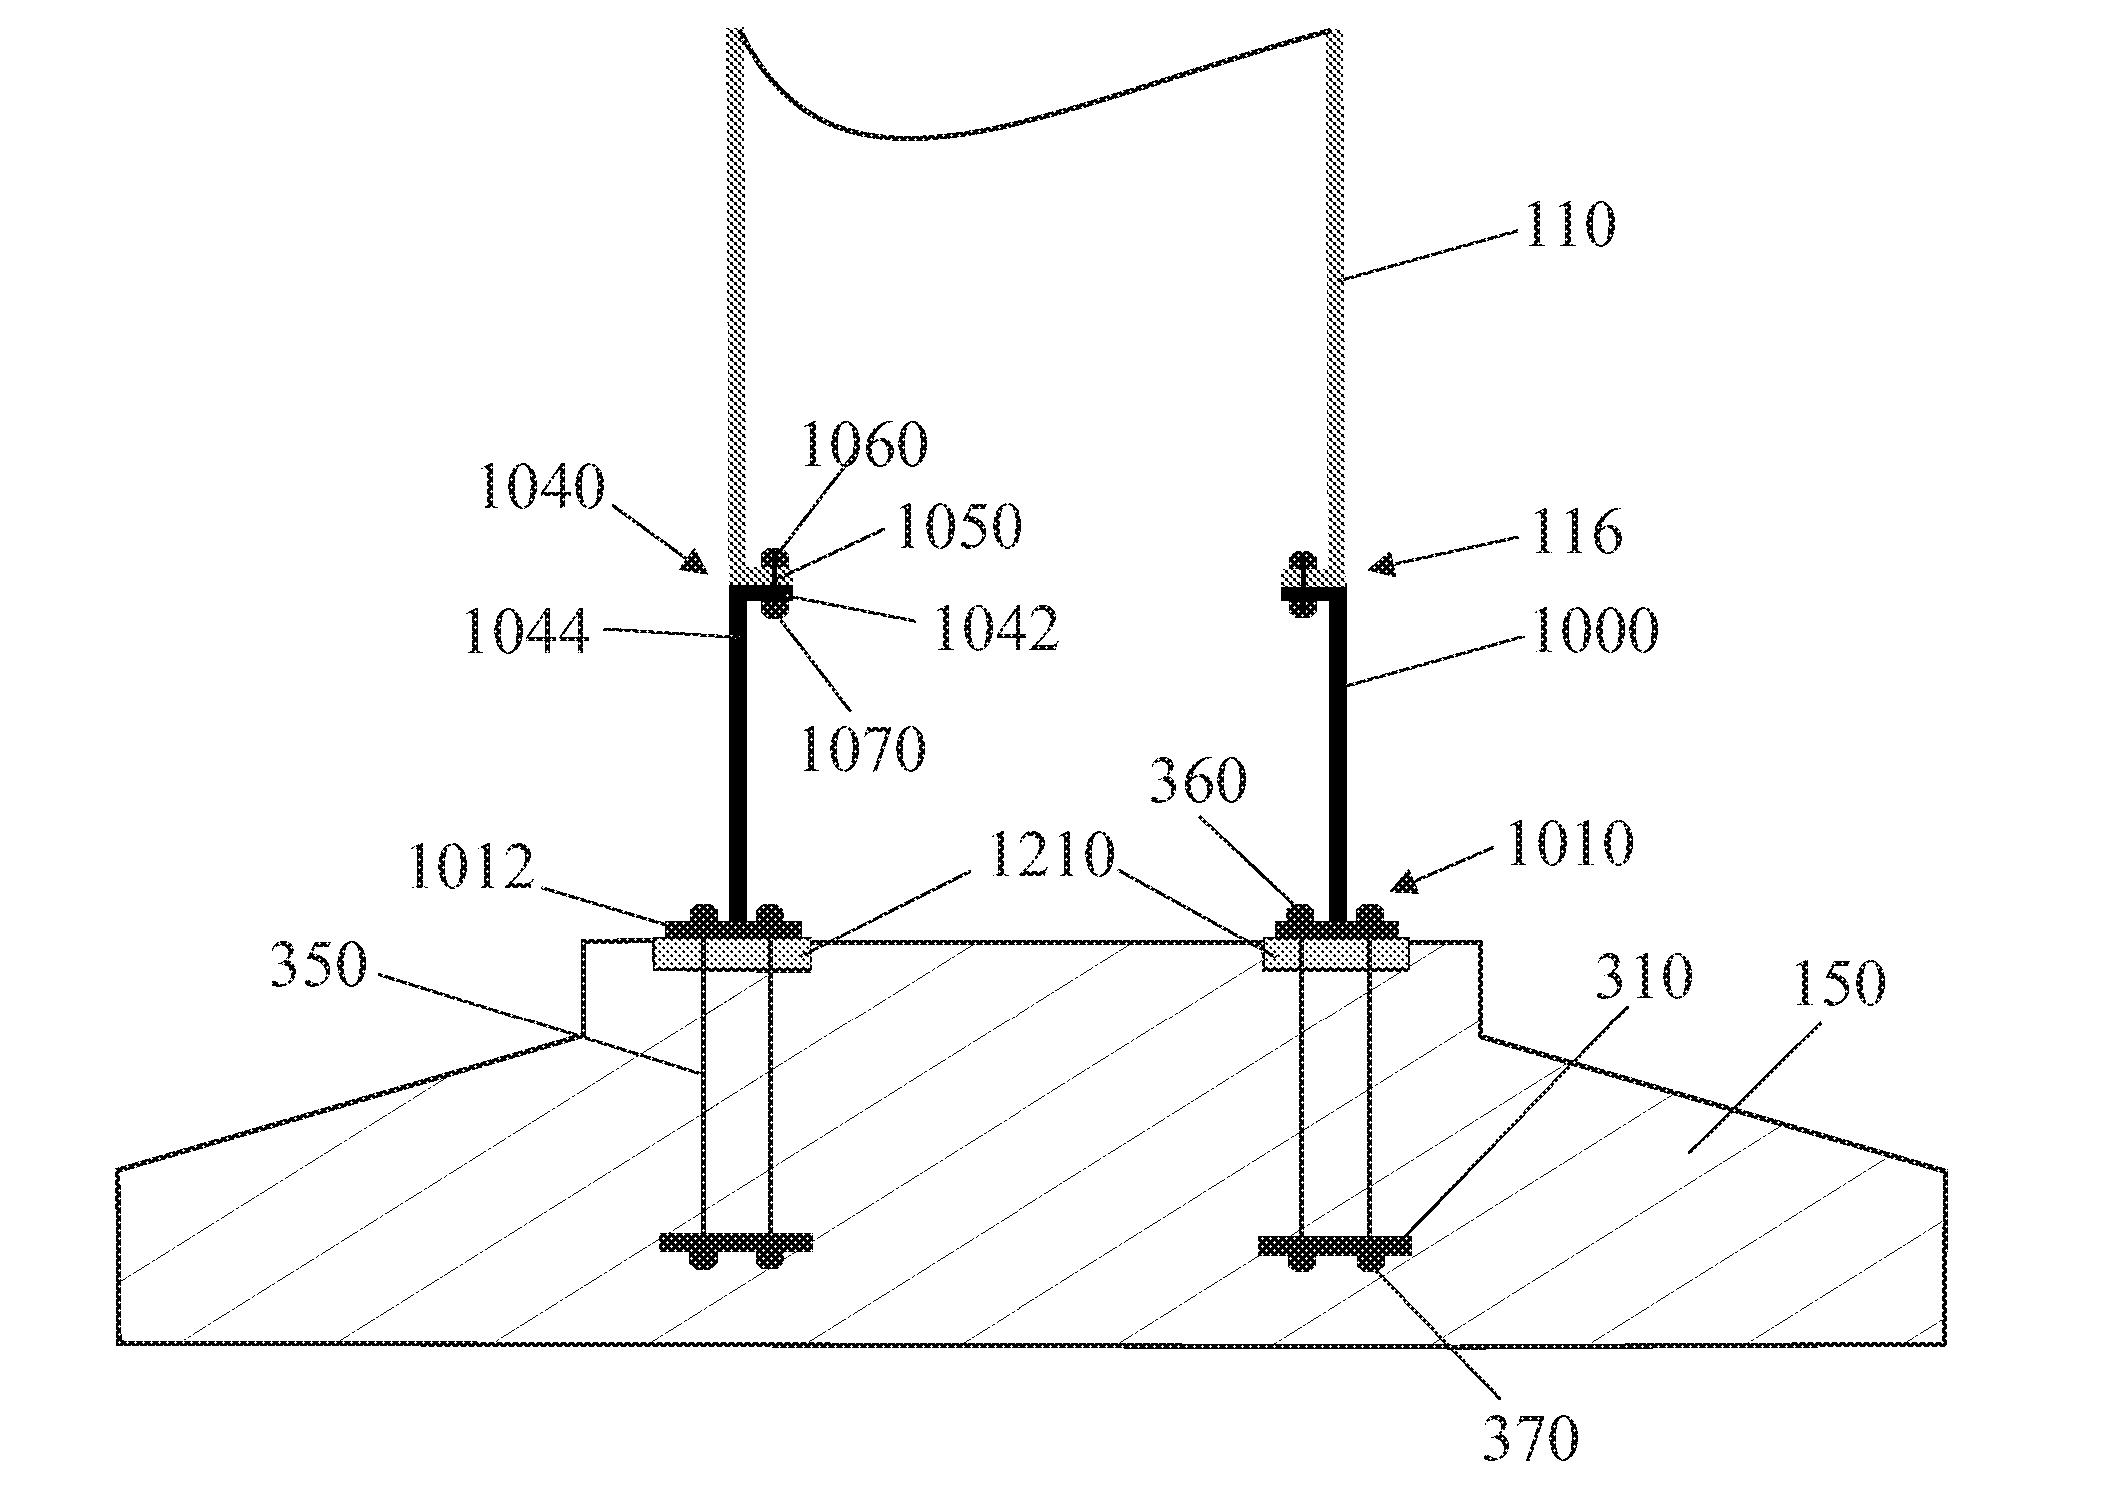 Tower adapter, method of producing a tower foundation and tower foundation